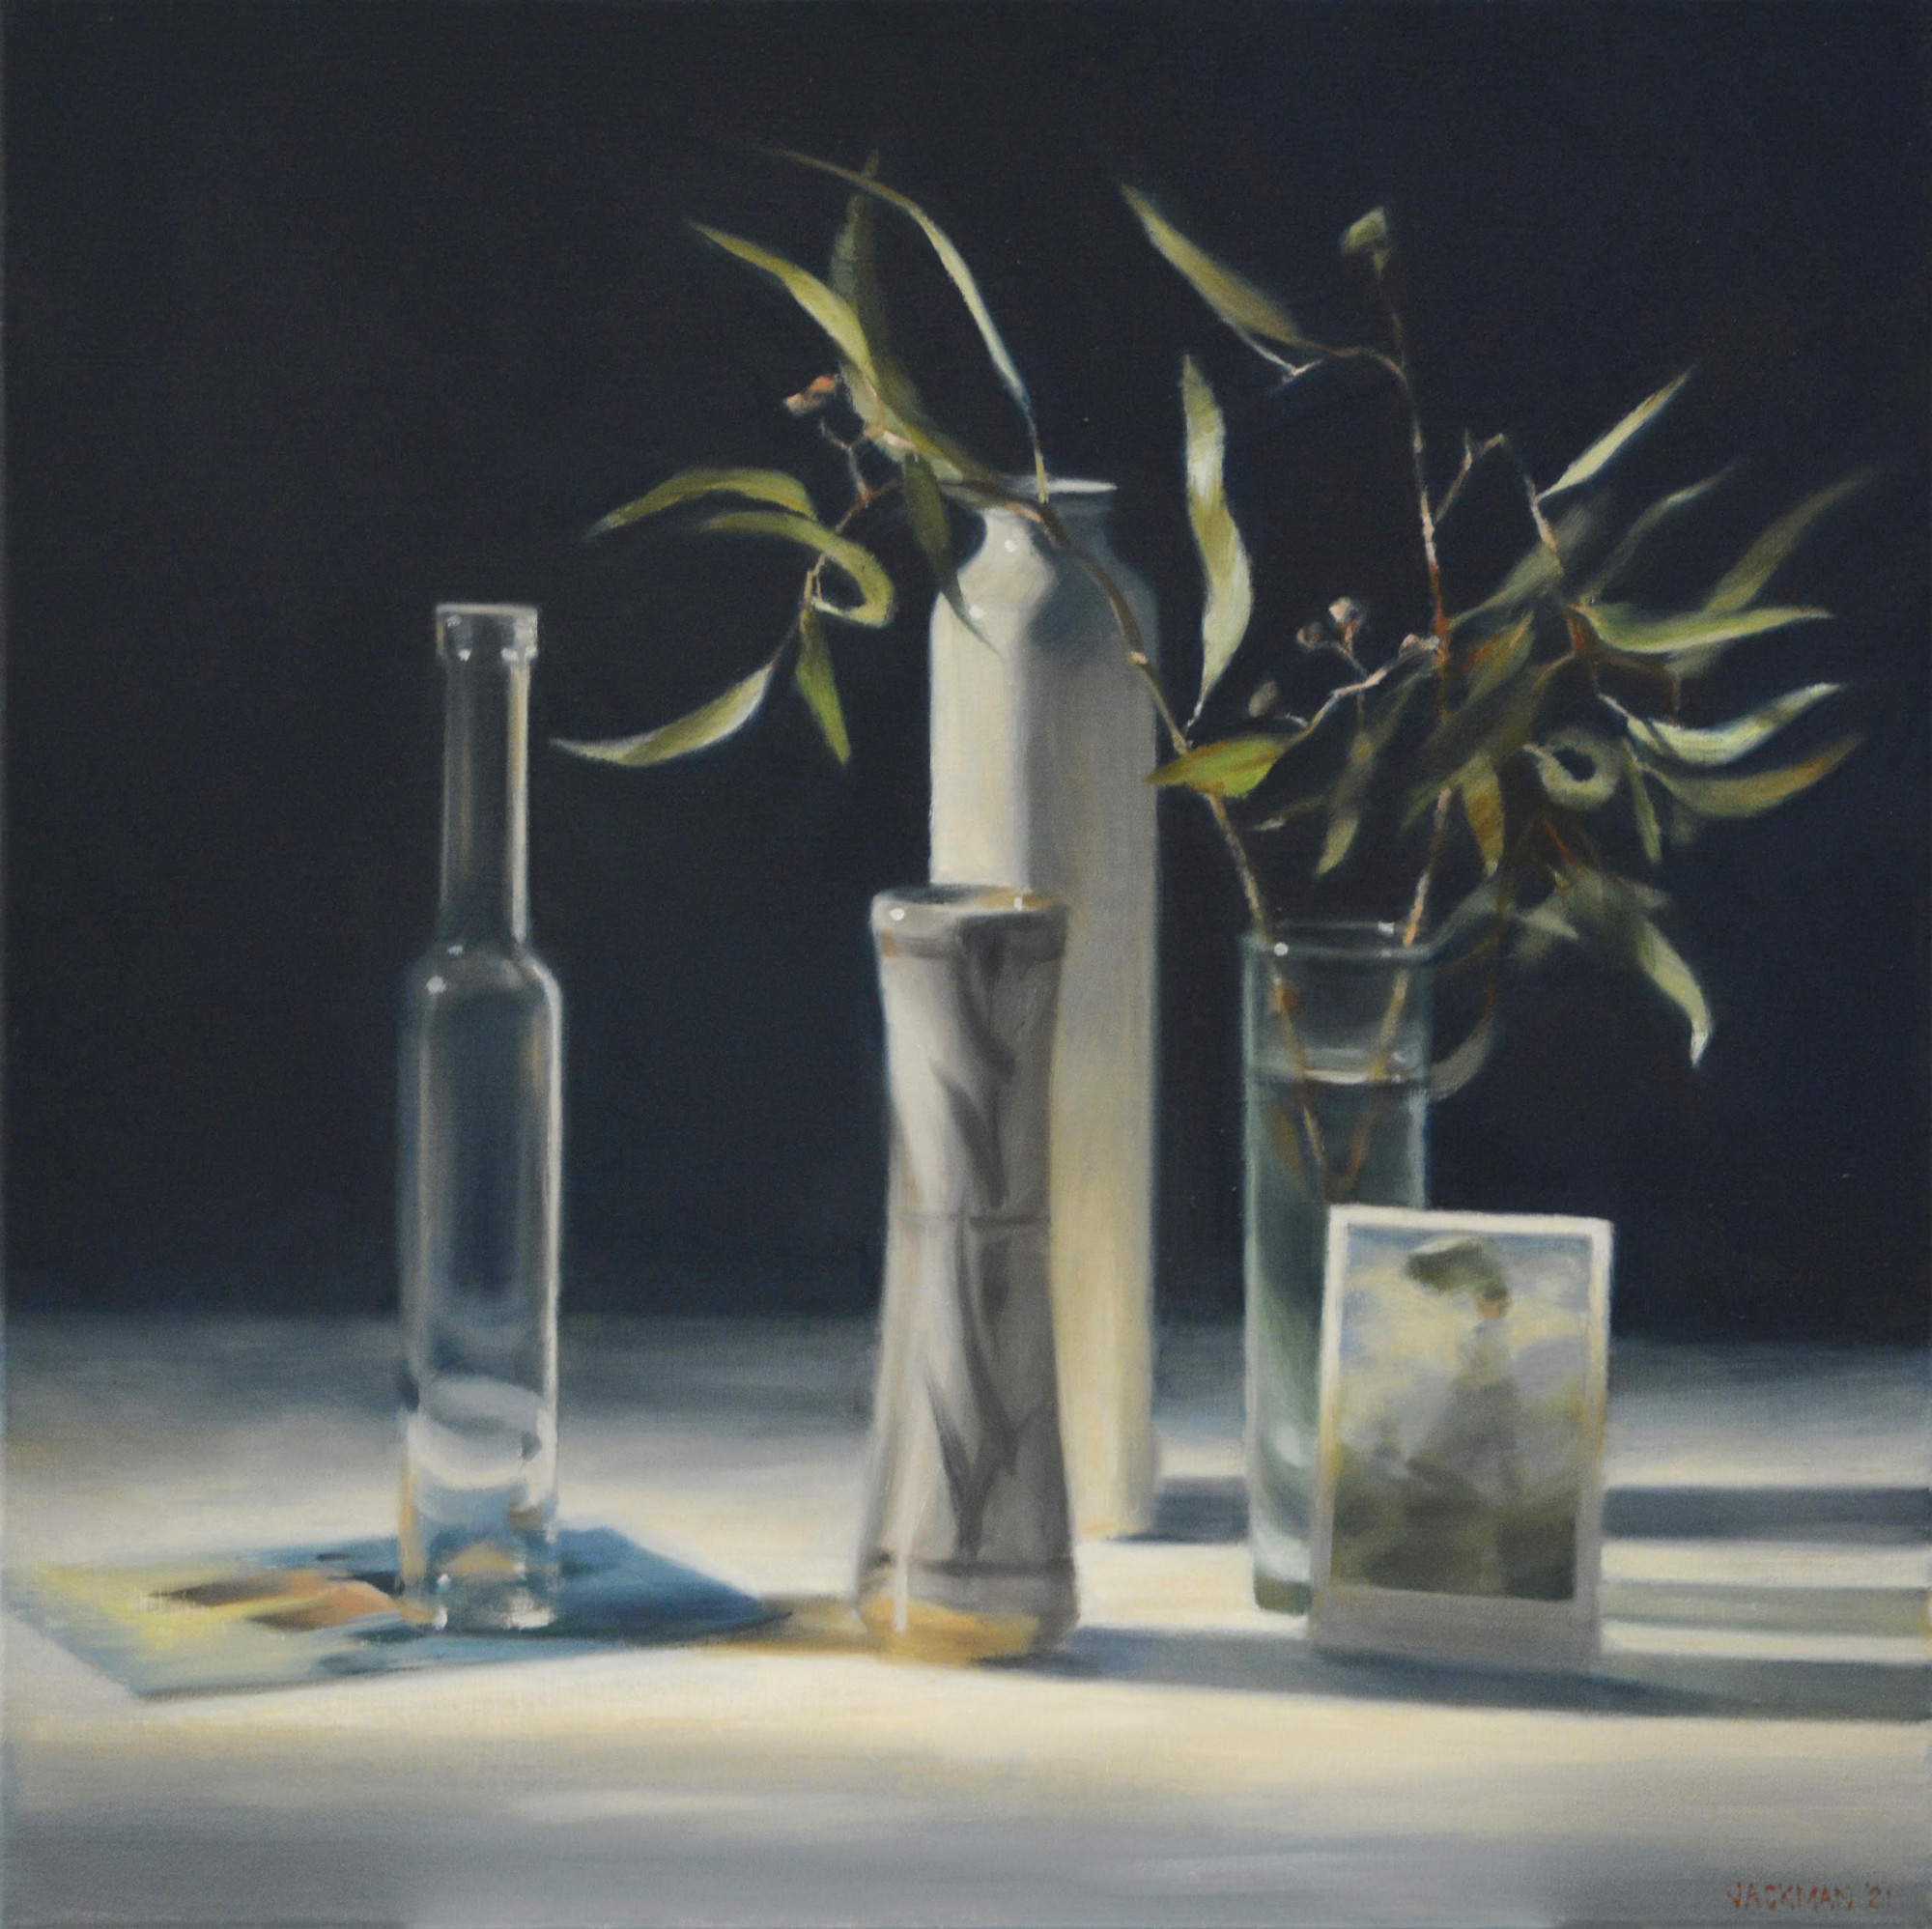 Hilary Jackman, <em>Tall Vessels and Cards</em>, 2021, oil on linen, 61.5 x 61.5cm. Courtesy the artist and Stockroom. Photo: Magali Gentric.